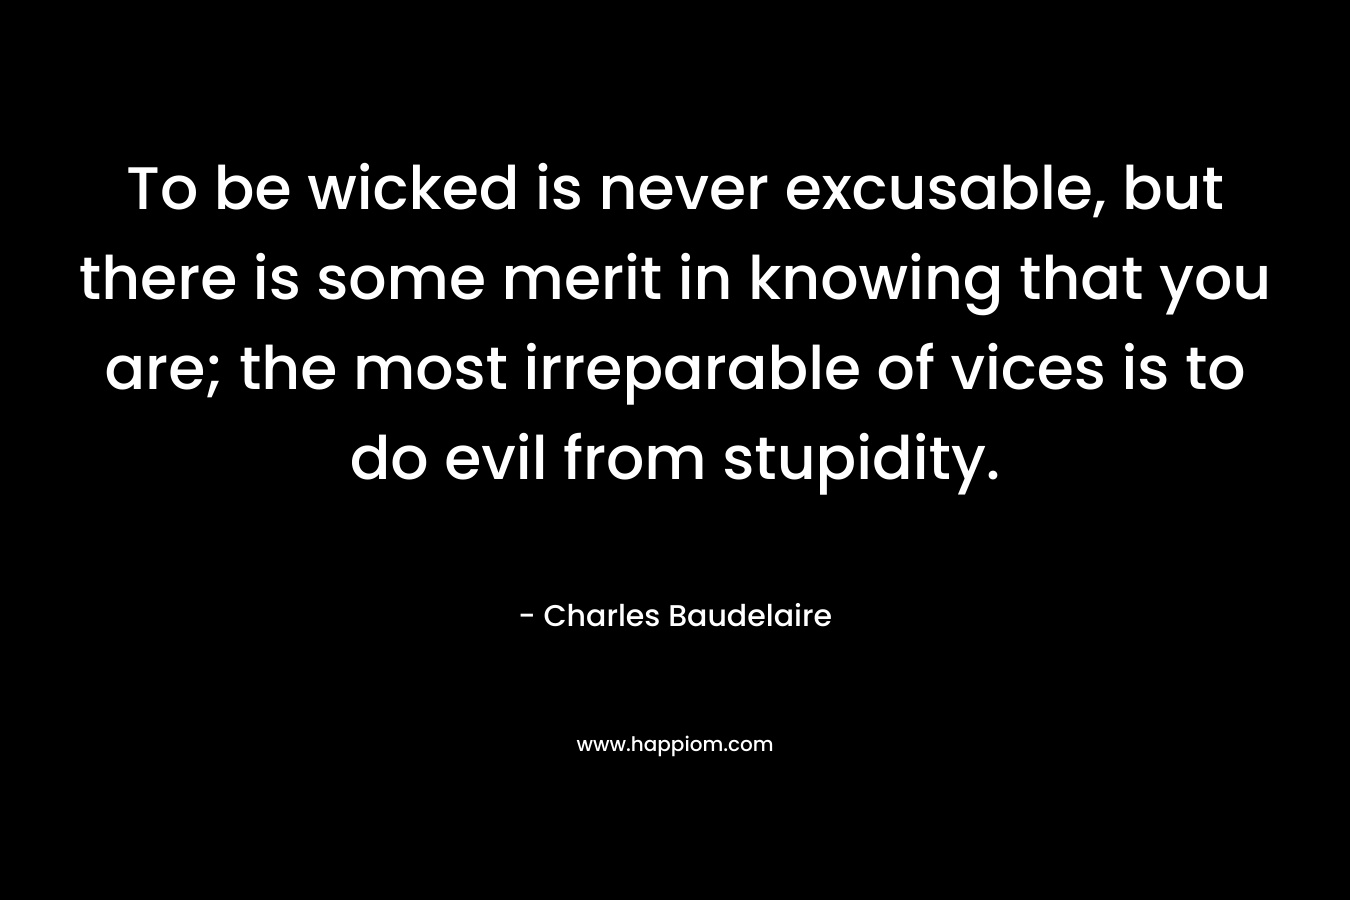 To be wicked is never excusable, but there is some merit in knowing that you are; the most irreparable of vices is to do evil from stupidity. – Charles Baudelaire